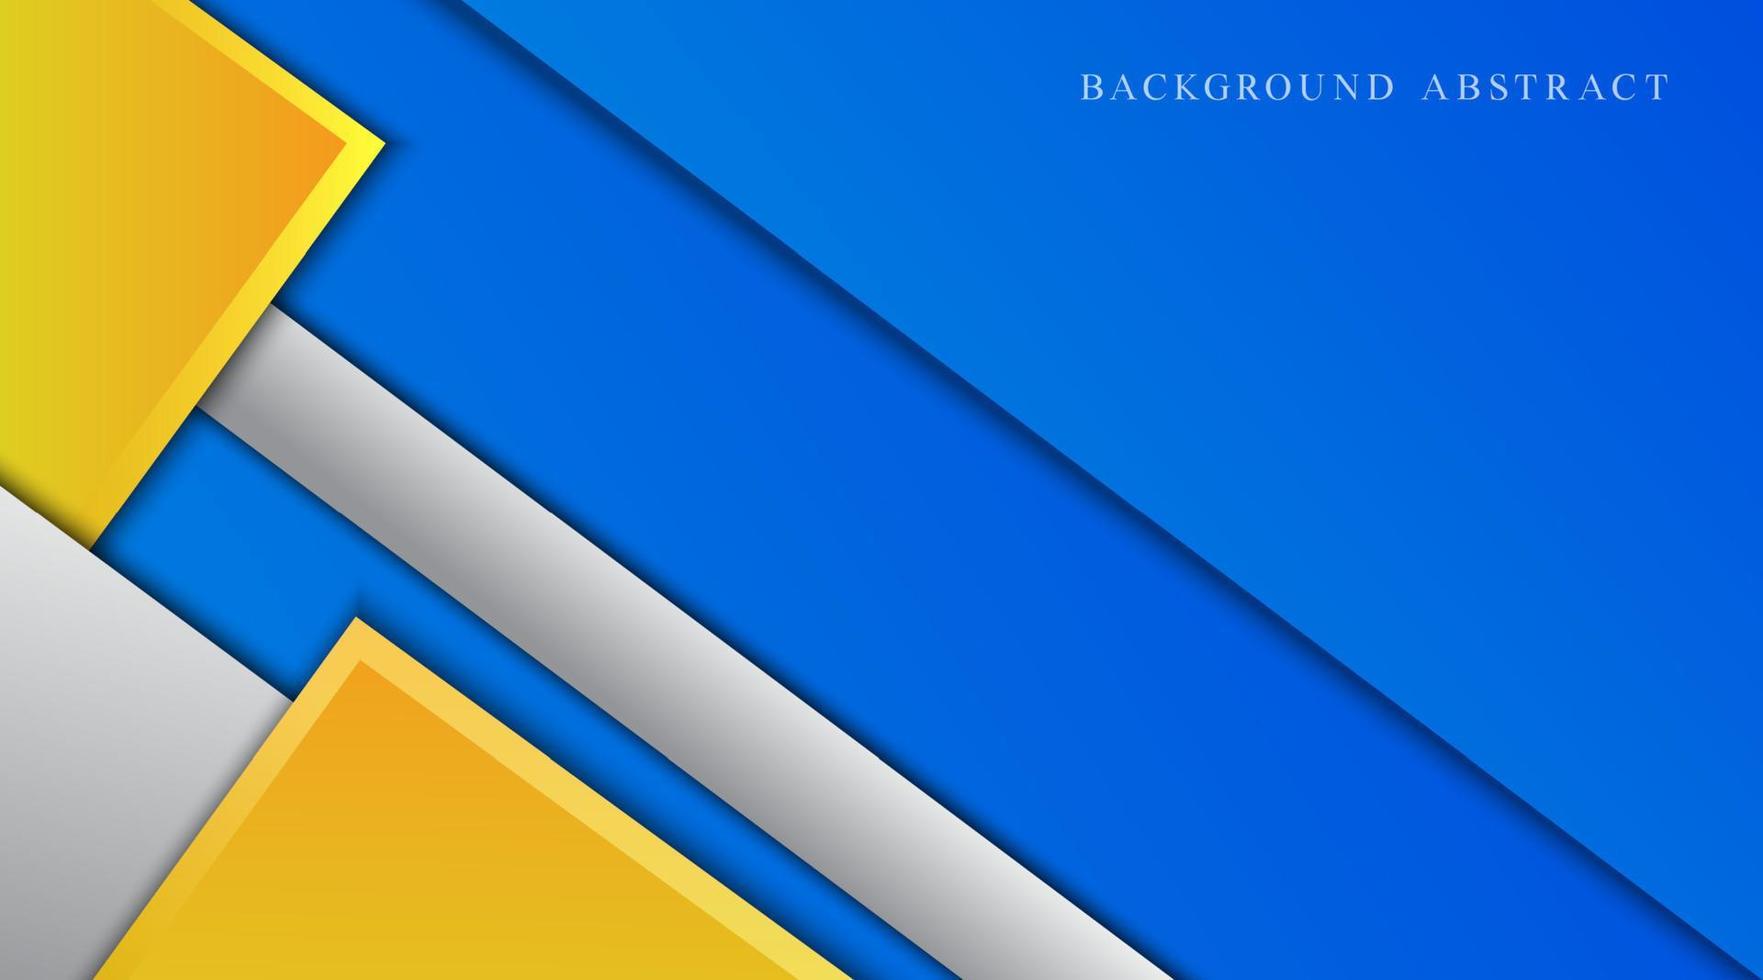 design vector, abstract background, blue white and yellow vector